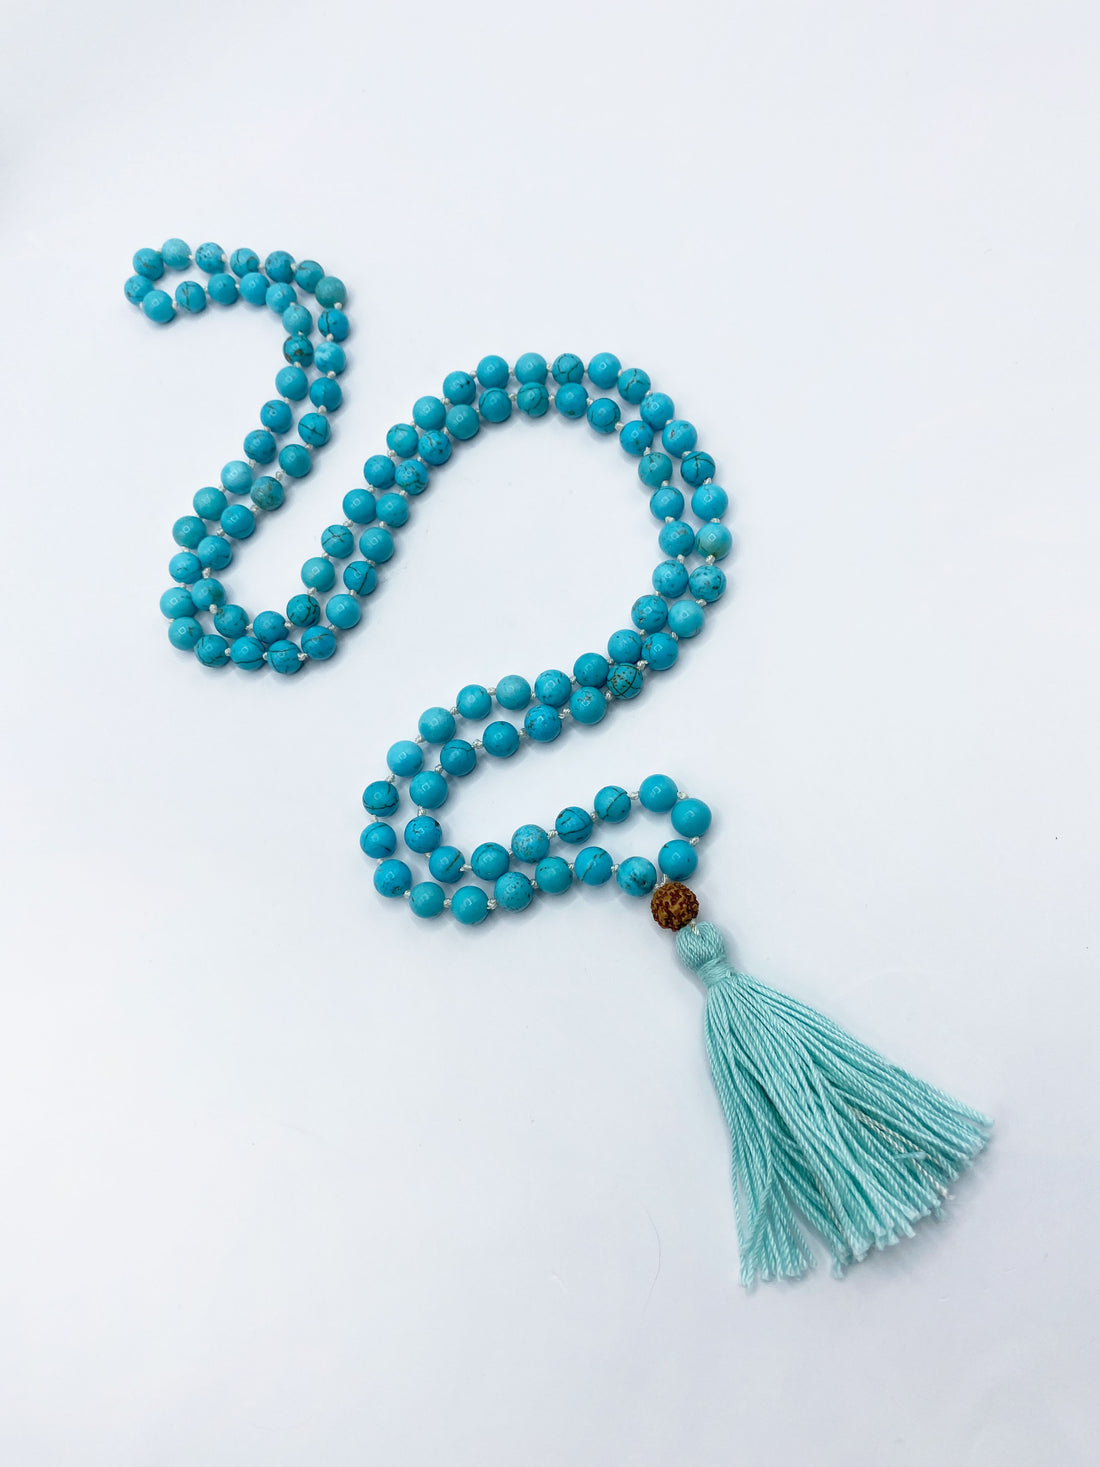 What is Mala?